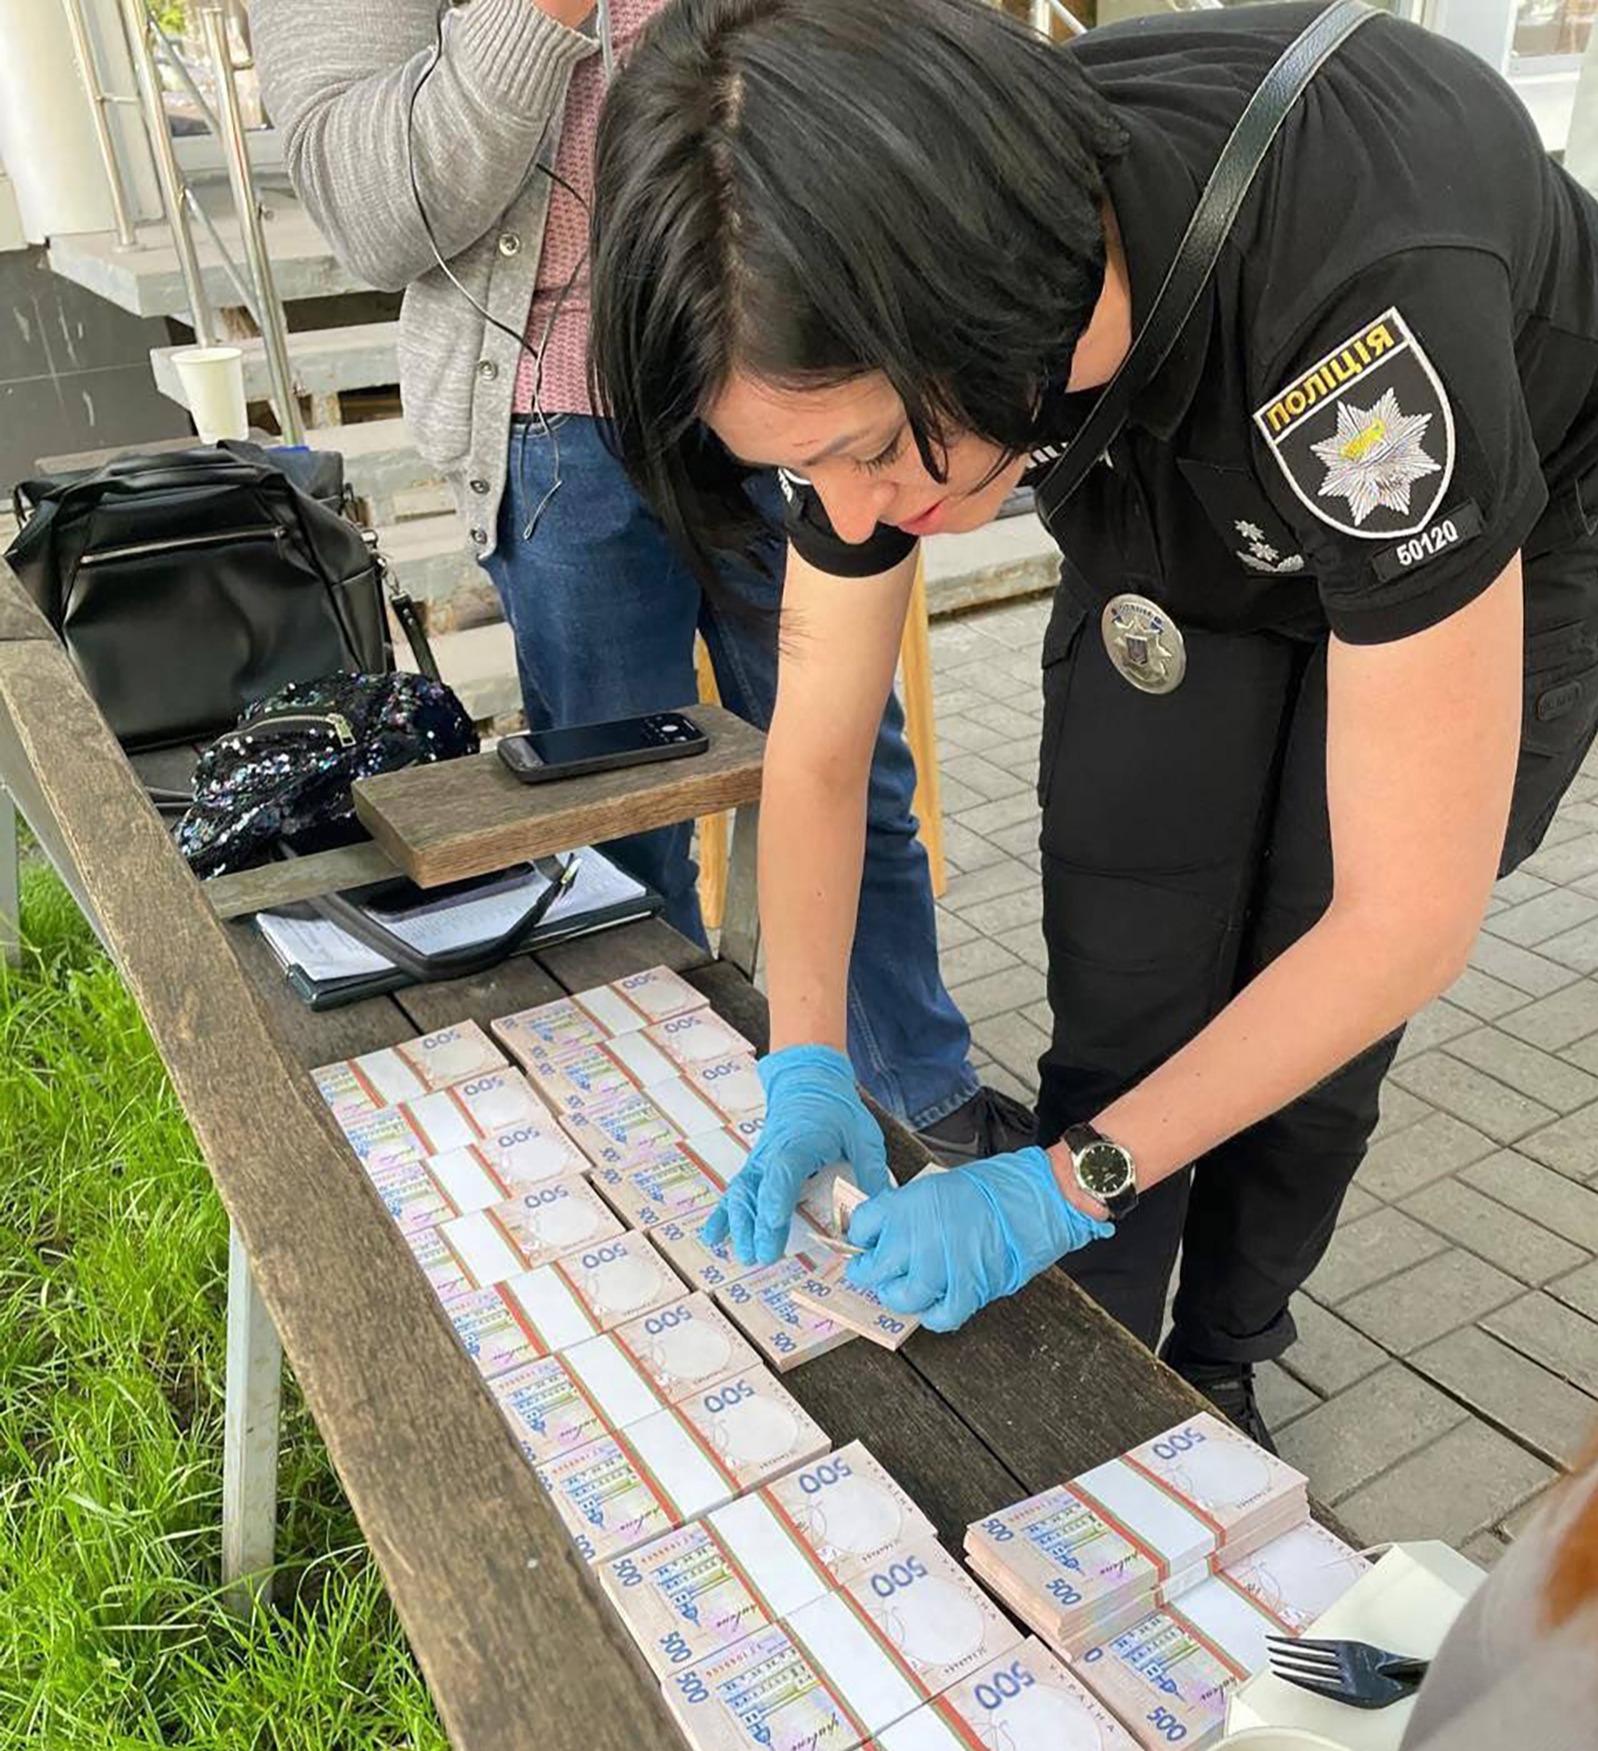 Here a police woman counts the cash found with the young mum